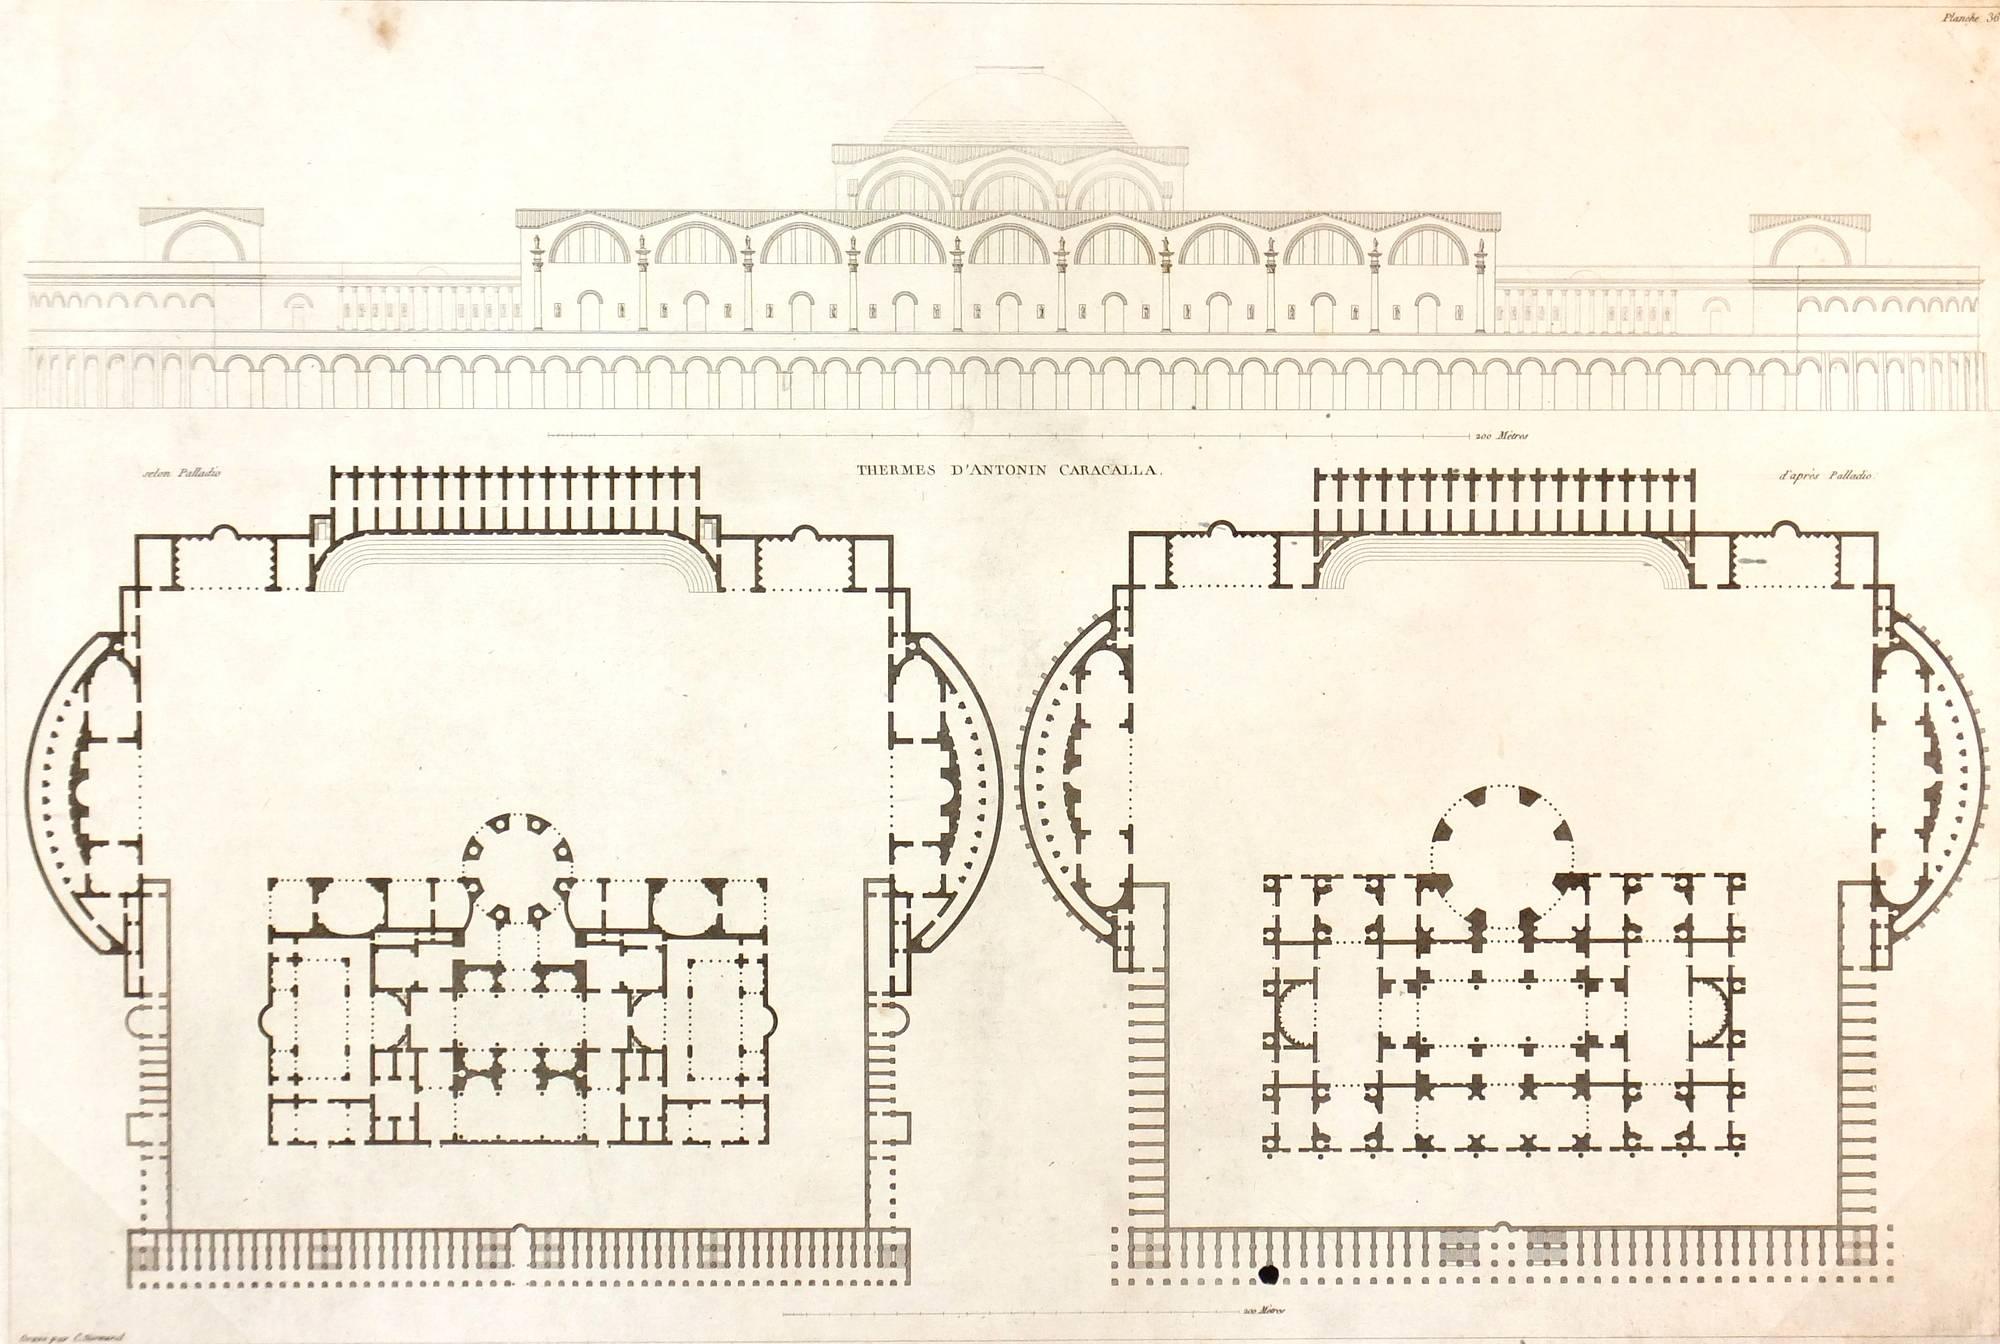 Unknown Interior Print - Architectural Engraving, 1800